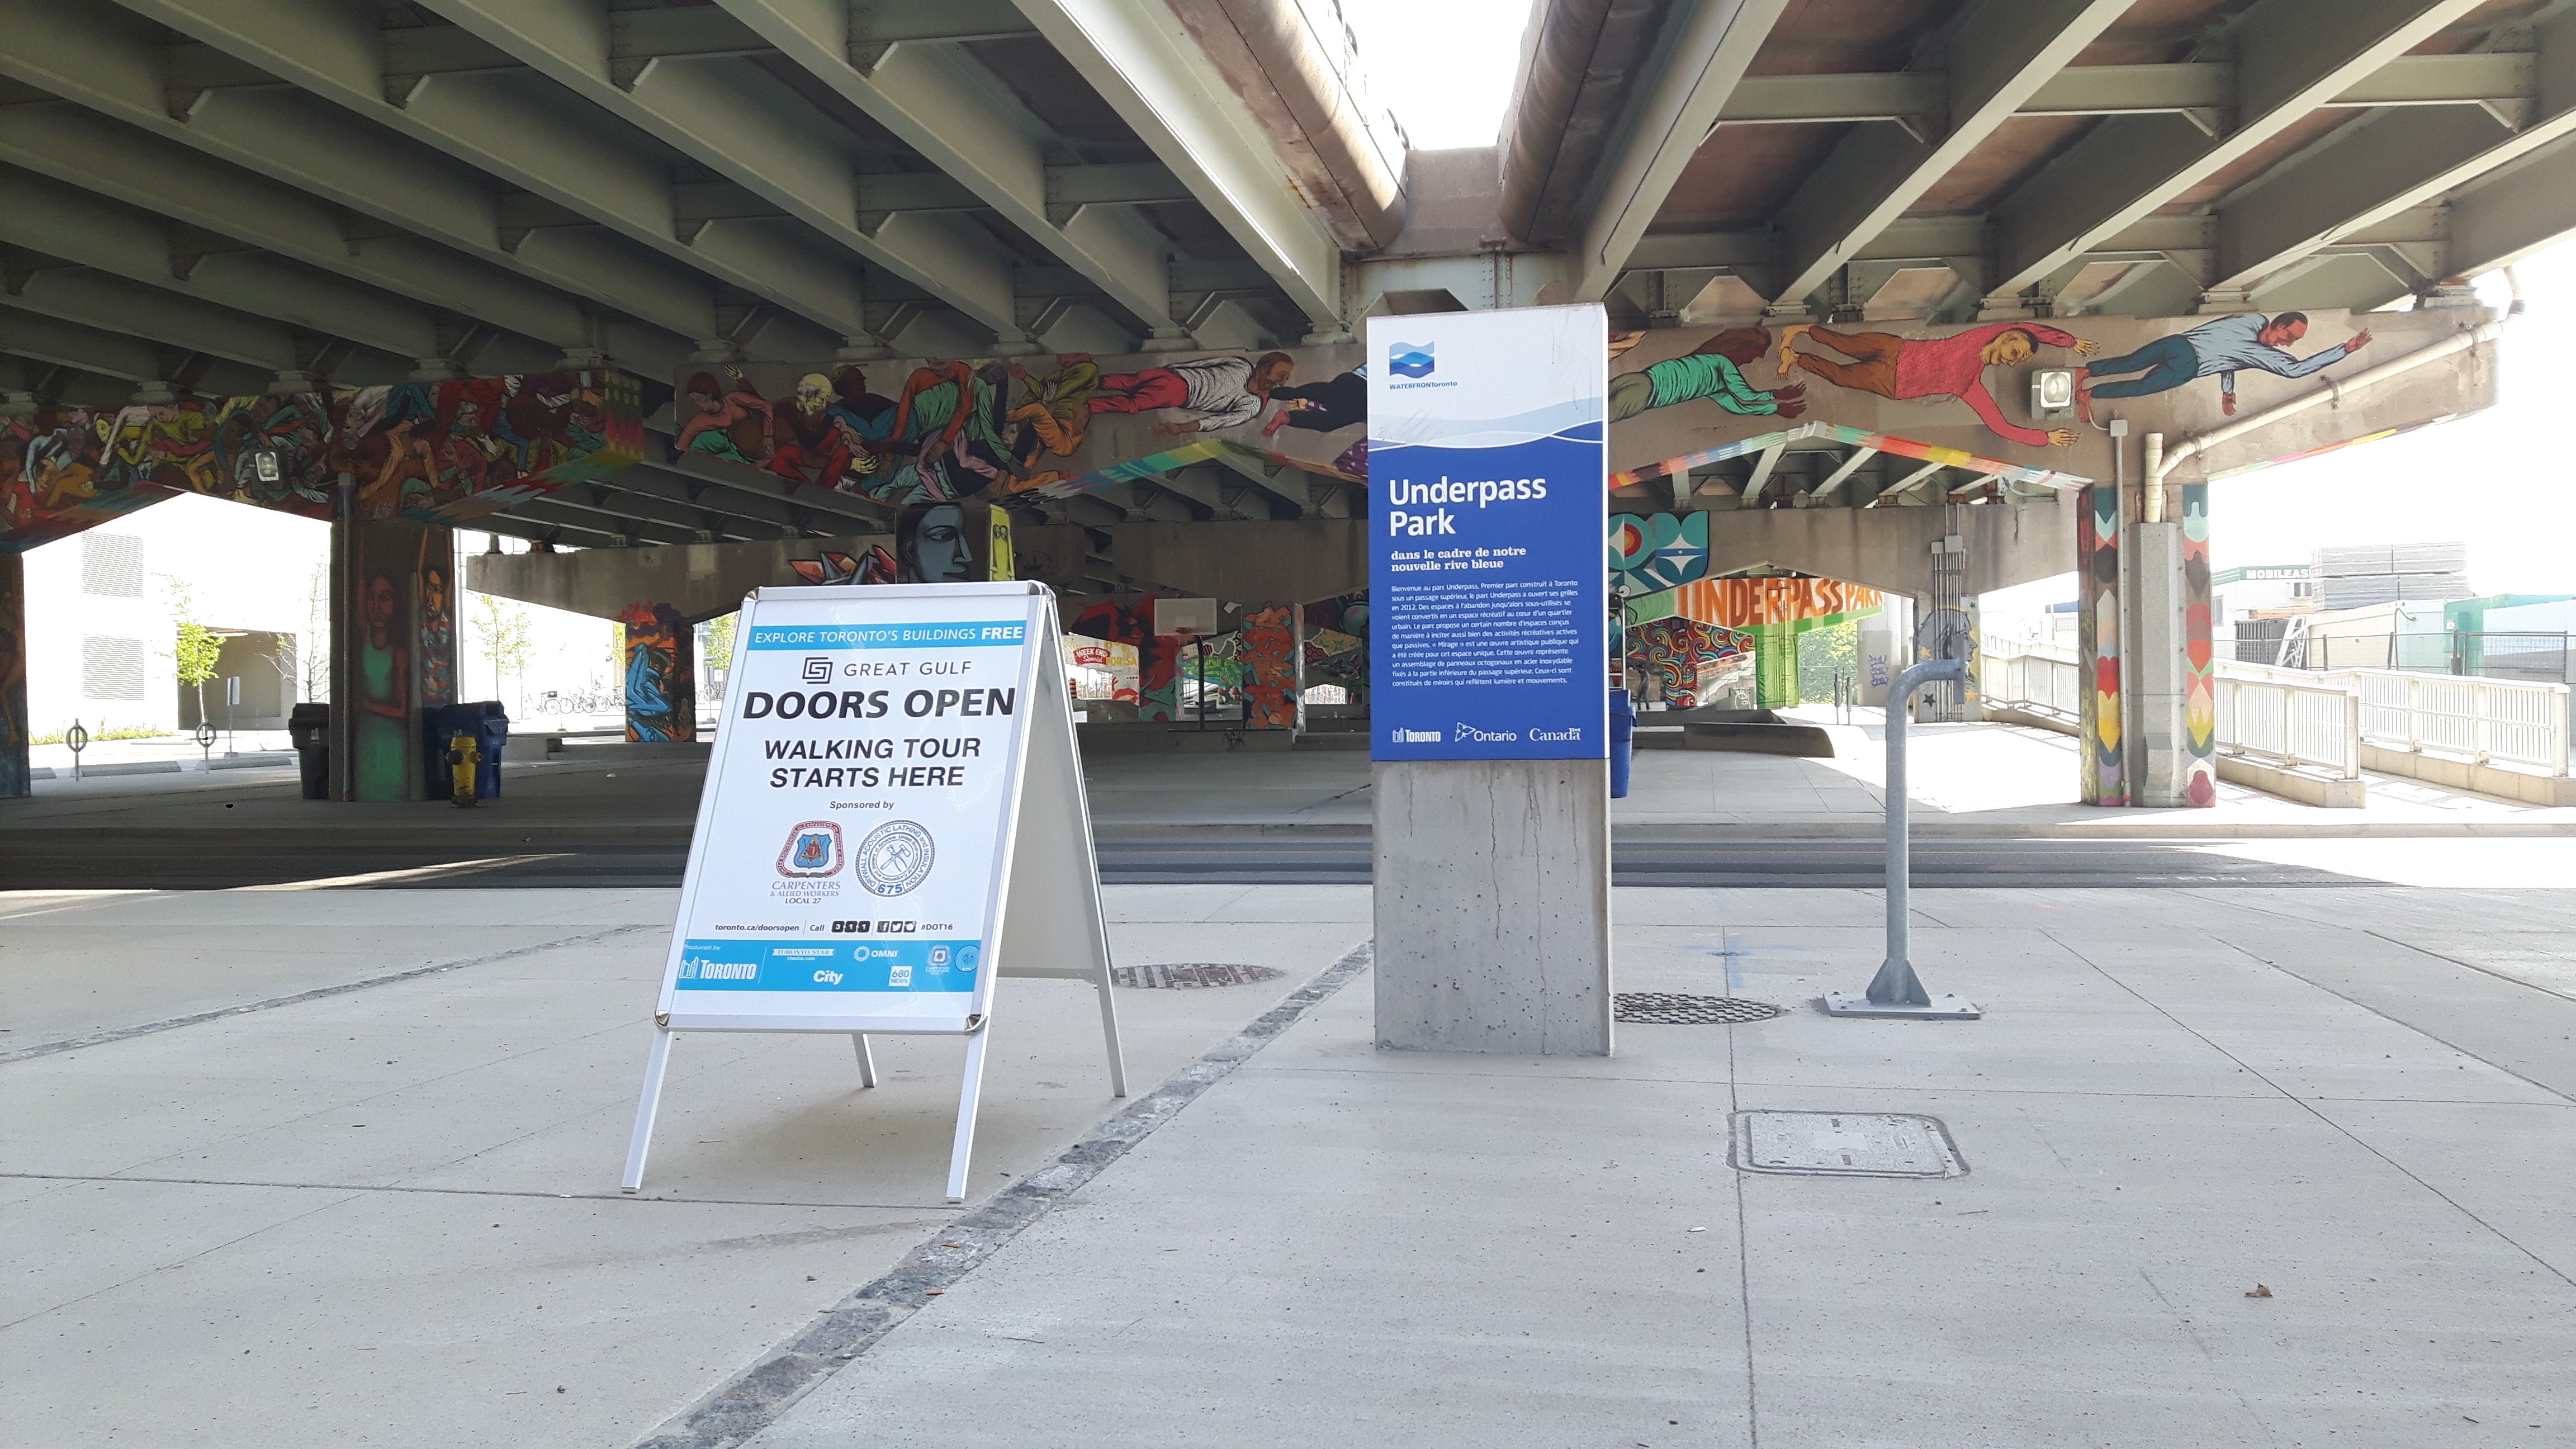 Signage indicating to visitors that the Doors Open tour begins at Underpass Park.